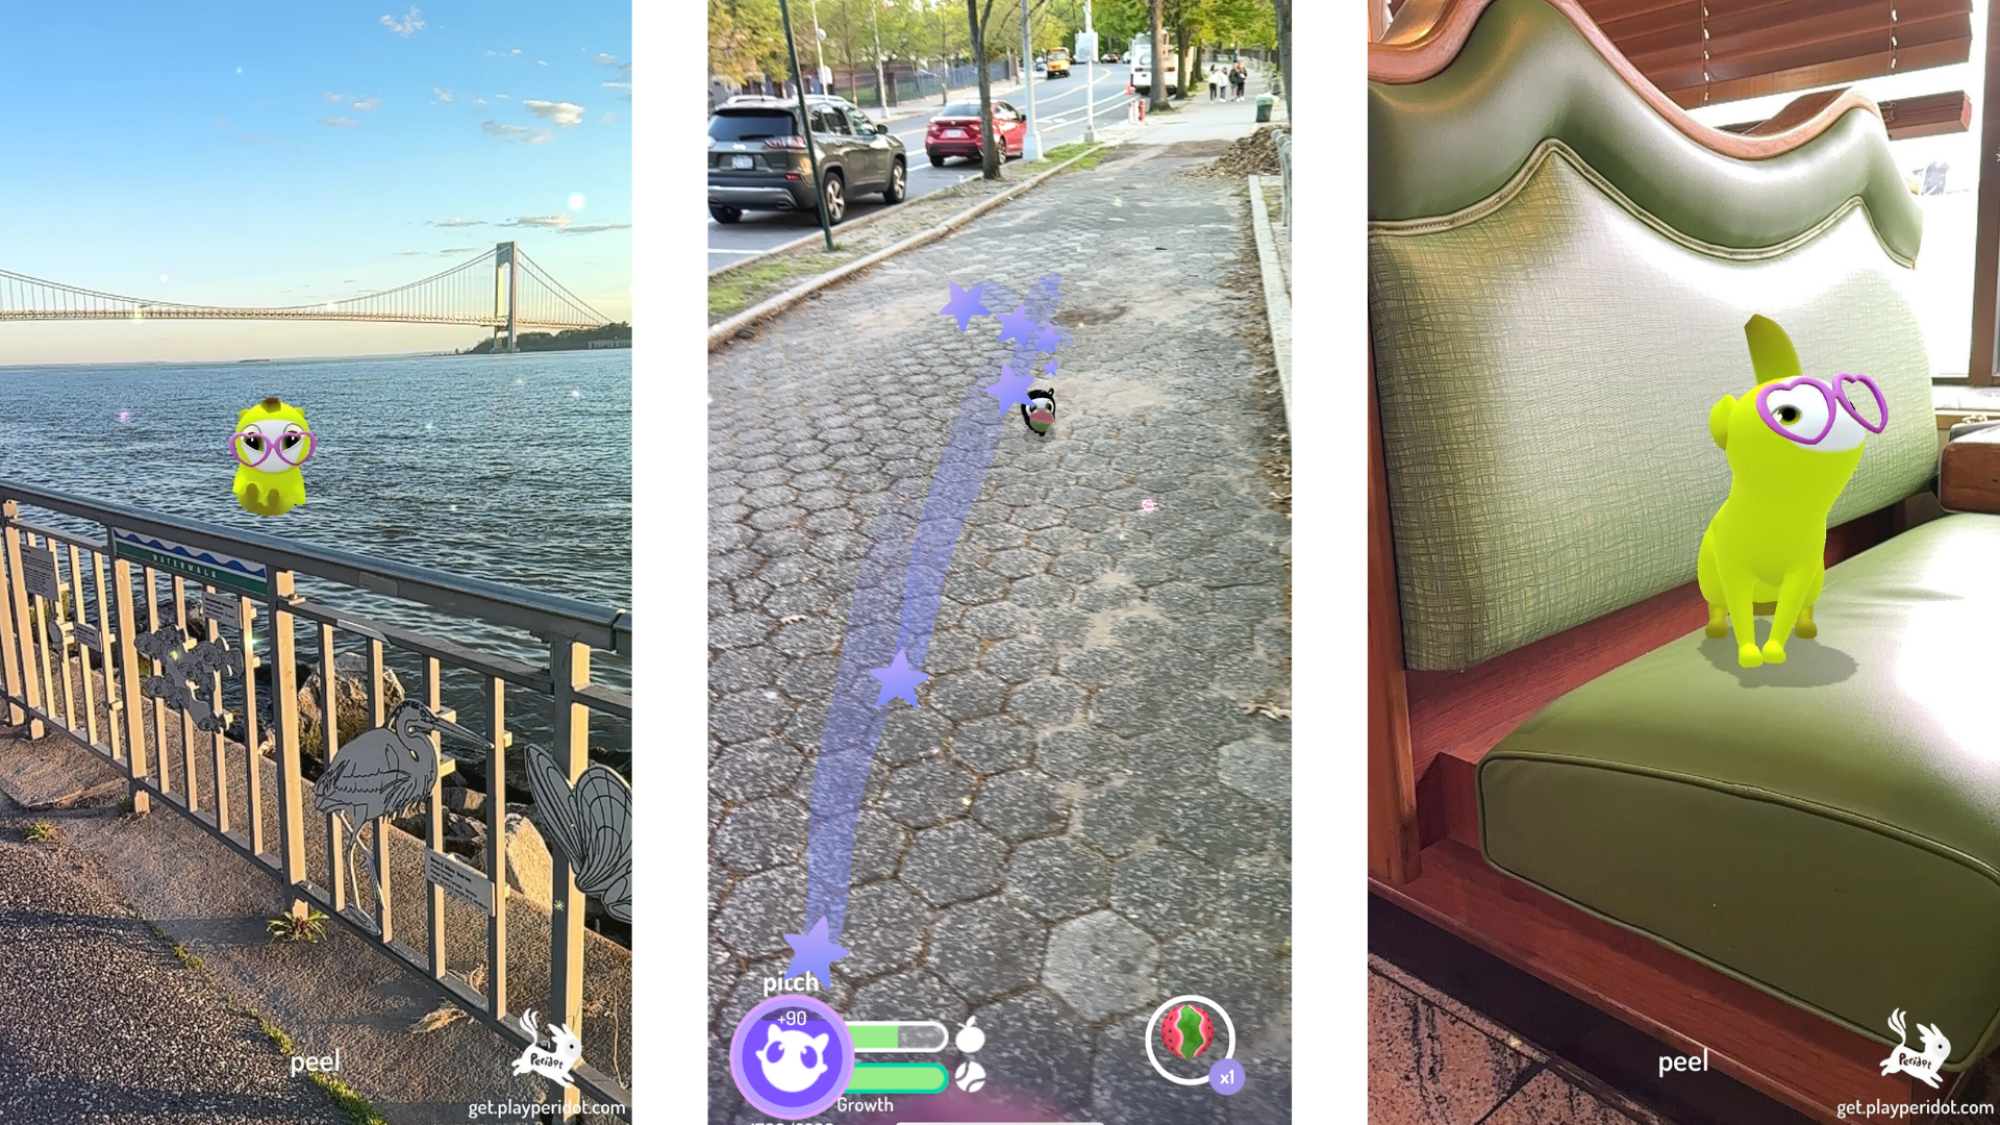 Three screenshots from the game: one showing Peel, my yellow banana-type dot, floating in the air in front of a harbor. The middle shows my black Peridot Pitch running towards me on the sidewalk. The third is a pic of Peel sitting in s green vinyl diner booth.